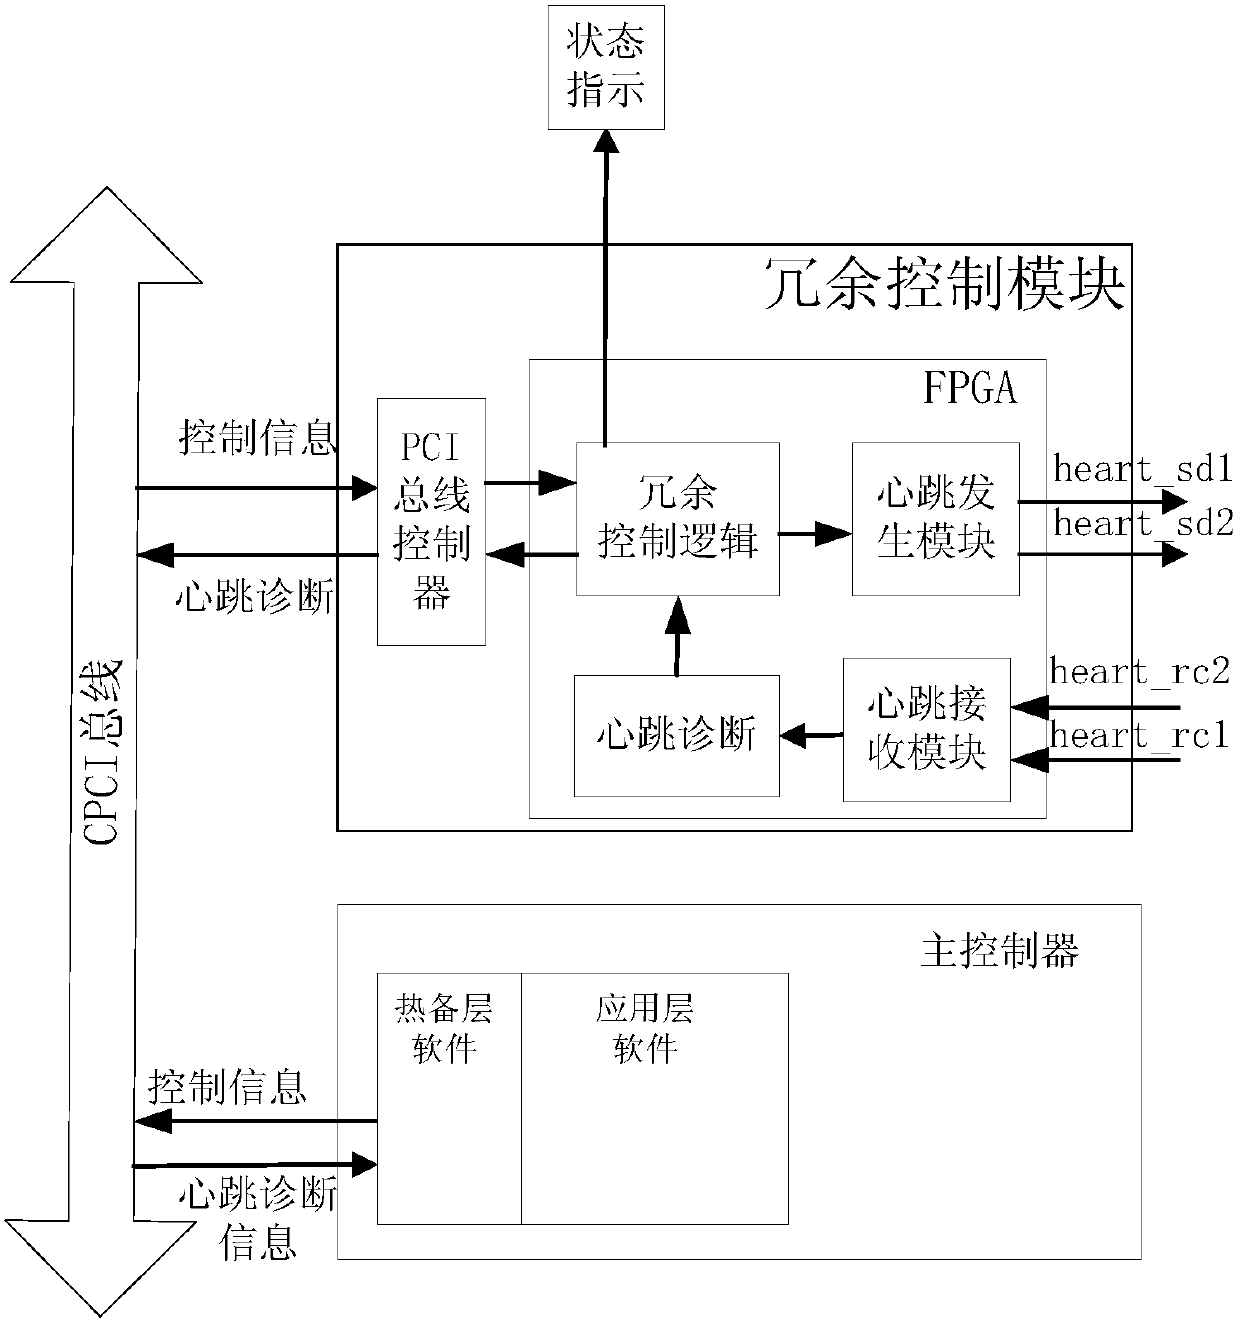 Redundancy switching unit of Chinese-made-Loongson-processor-based measurement and control devices